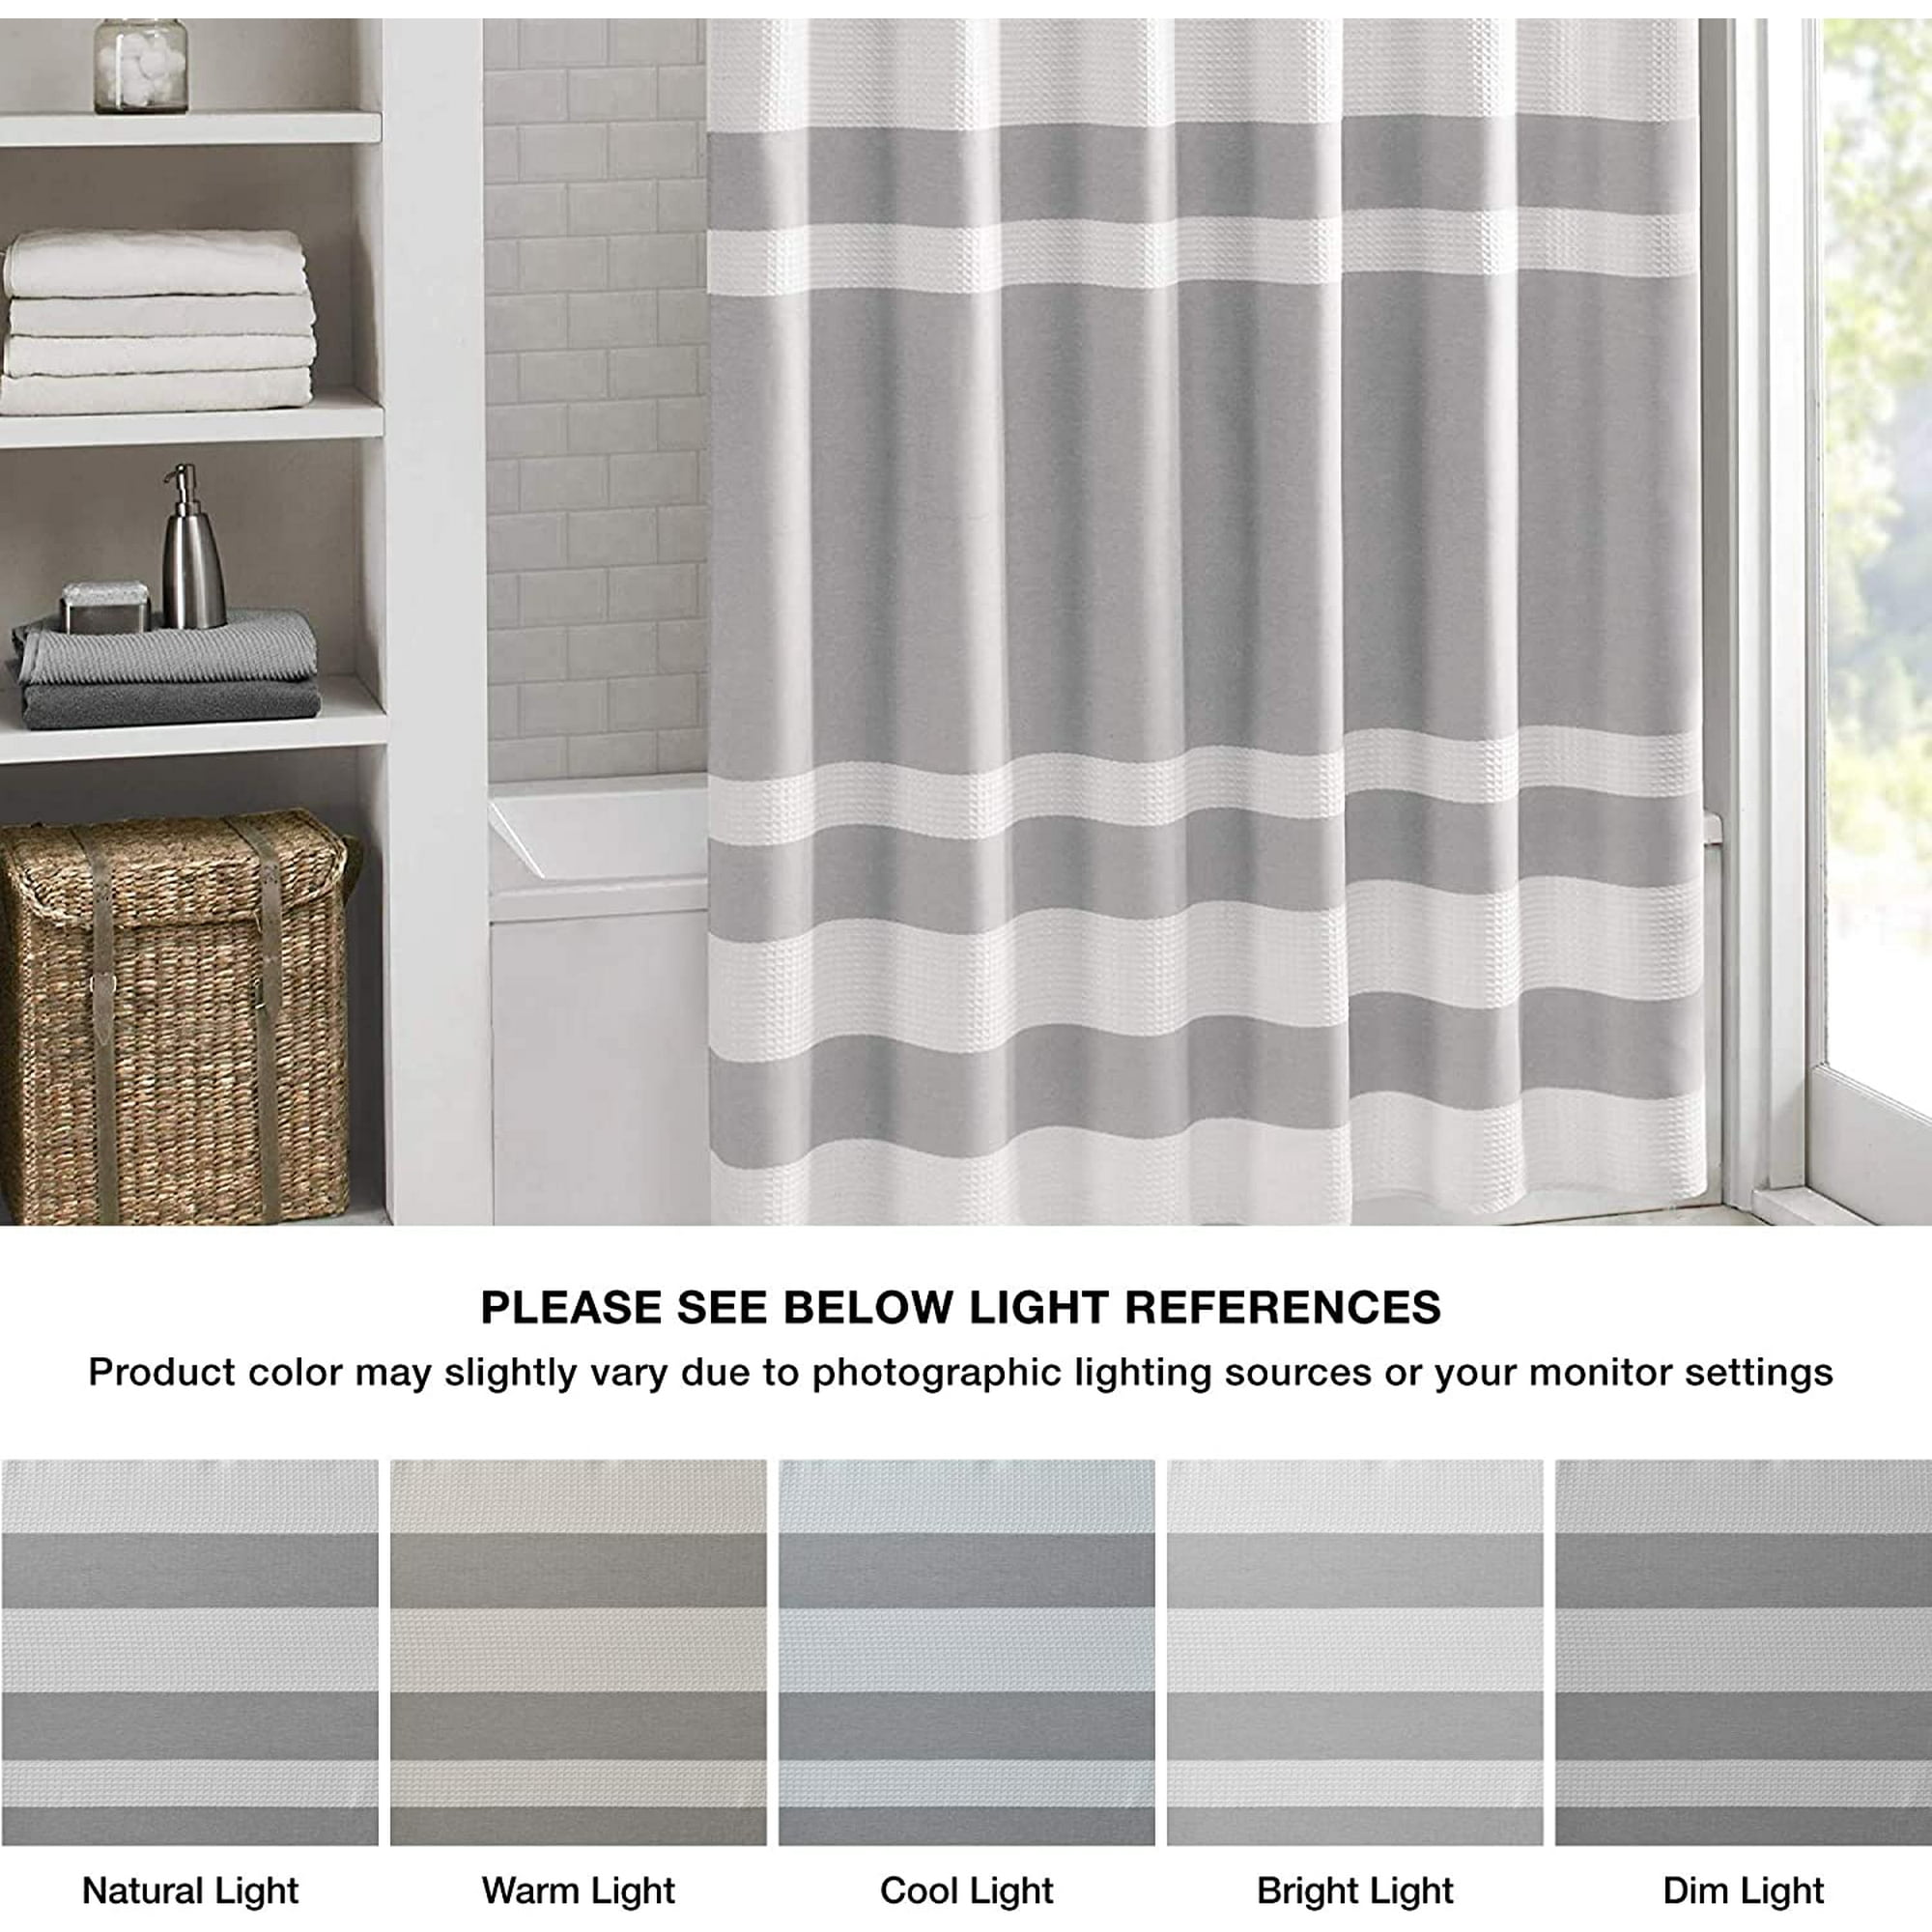 Tall 72X84 Madison Park Spa Waffle Shower Curtain Pieced Solid Microfiber Fabric with 3M Scotchgard Water Repellent Treatment Modern Home Bathroom Decorations Grey 